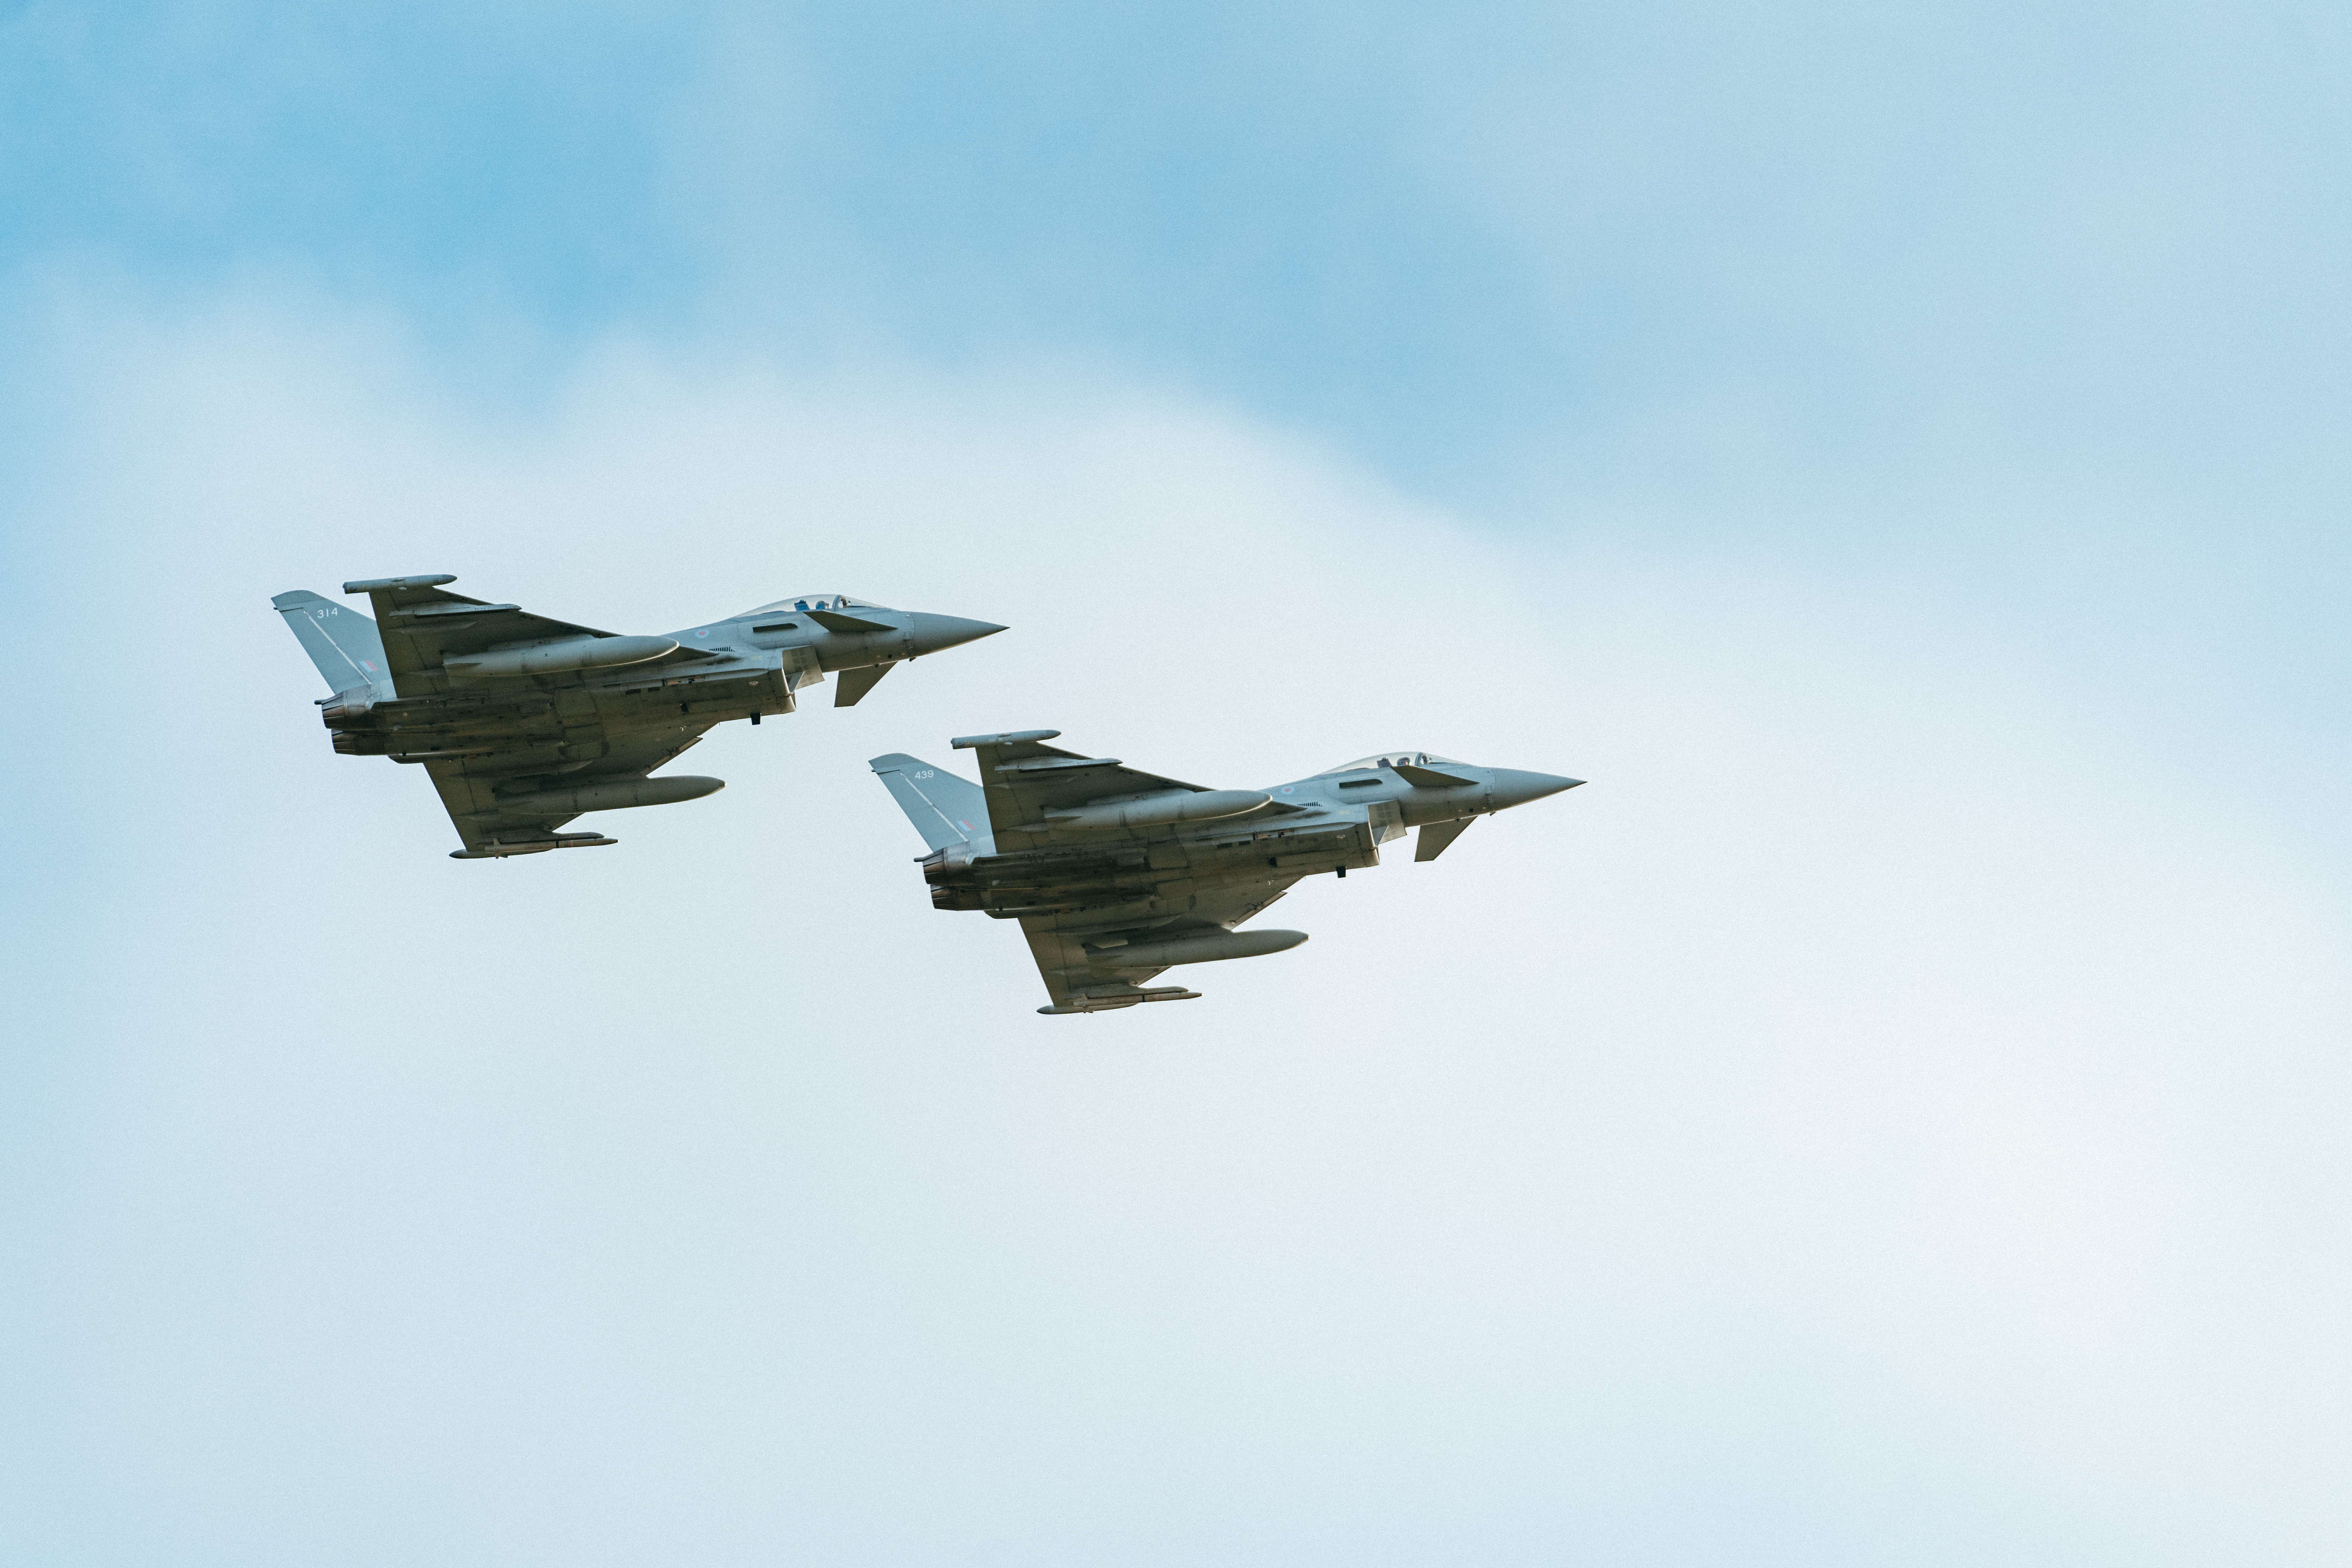 Image shows two RAF Typhoons in flight.